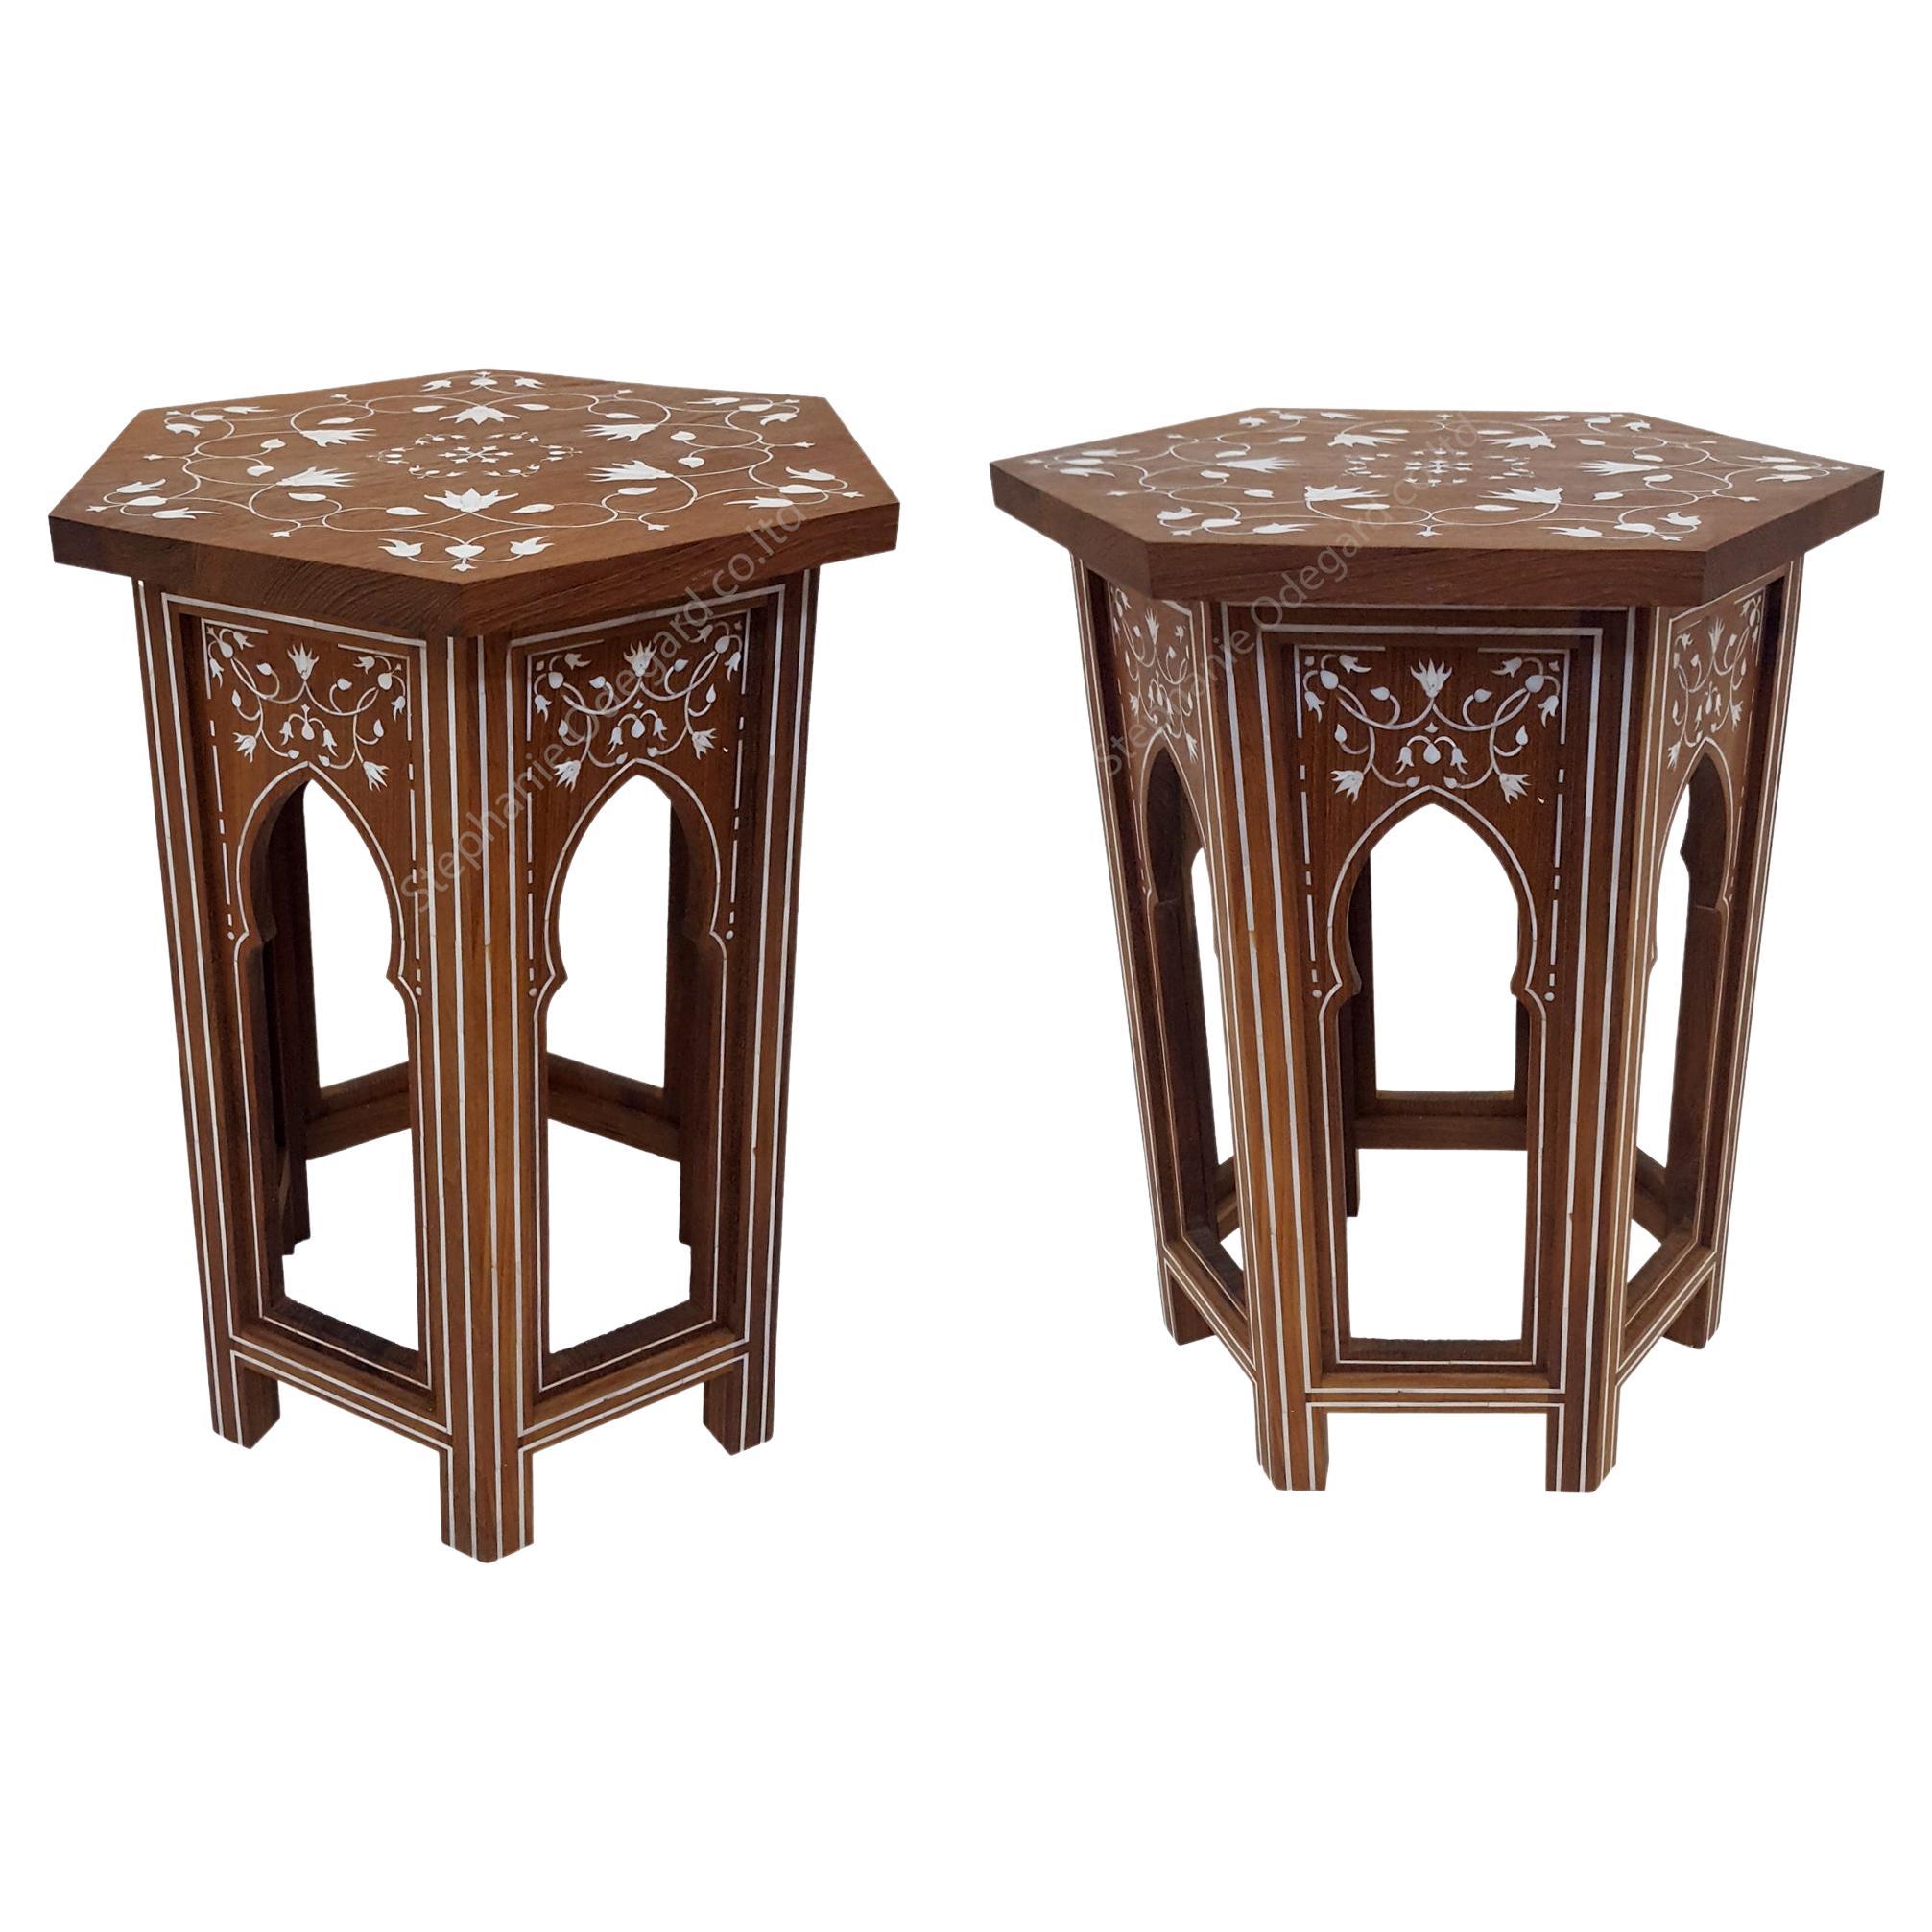 Pair of Side Tables, Round Bed Side Tables with Mother of Pearl Inlay in Wood